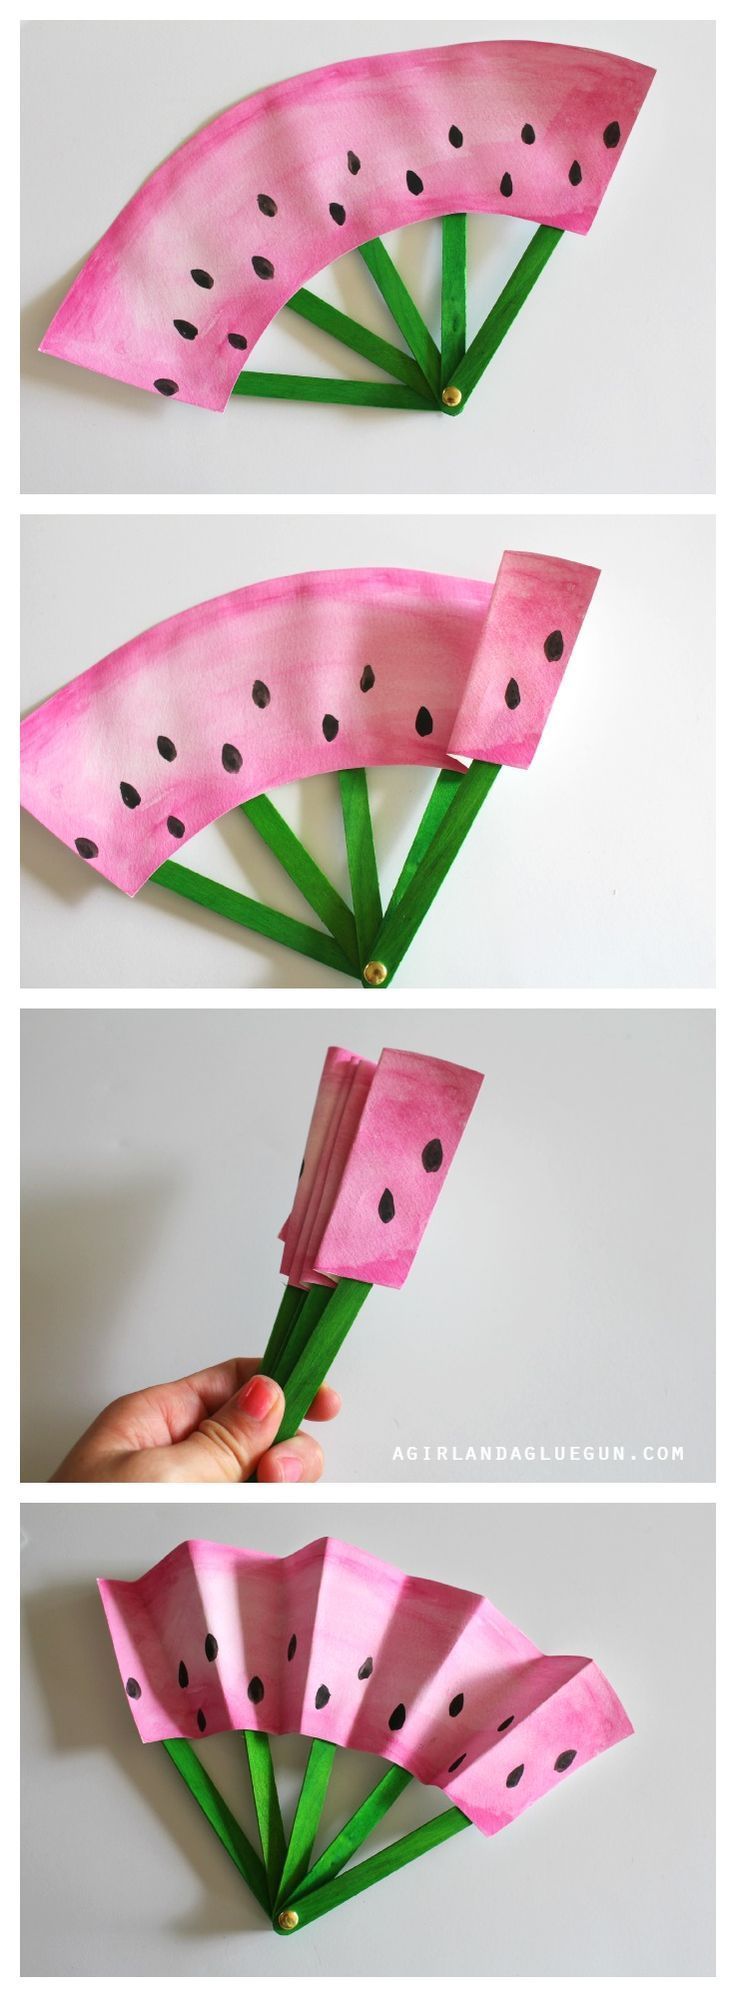 Create a fun DIY Fruit Fan with this adorable kids craft which is perfect for summer. Keep the kids busy with this fun and simple